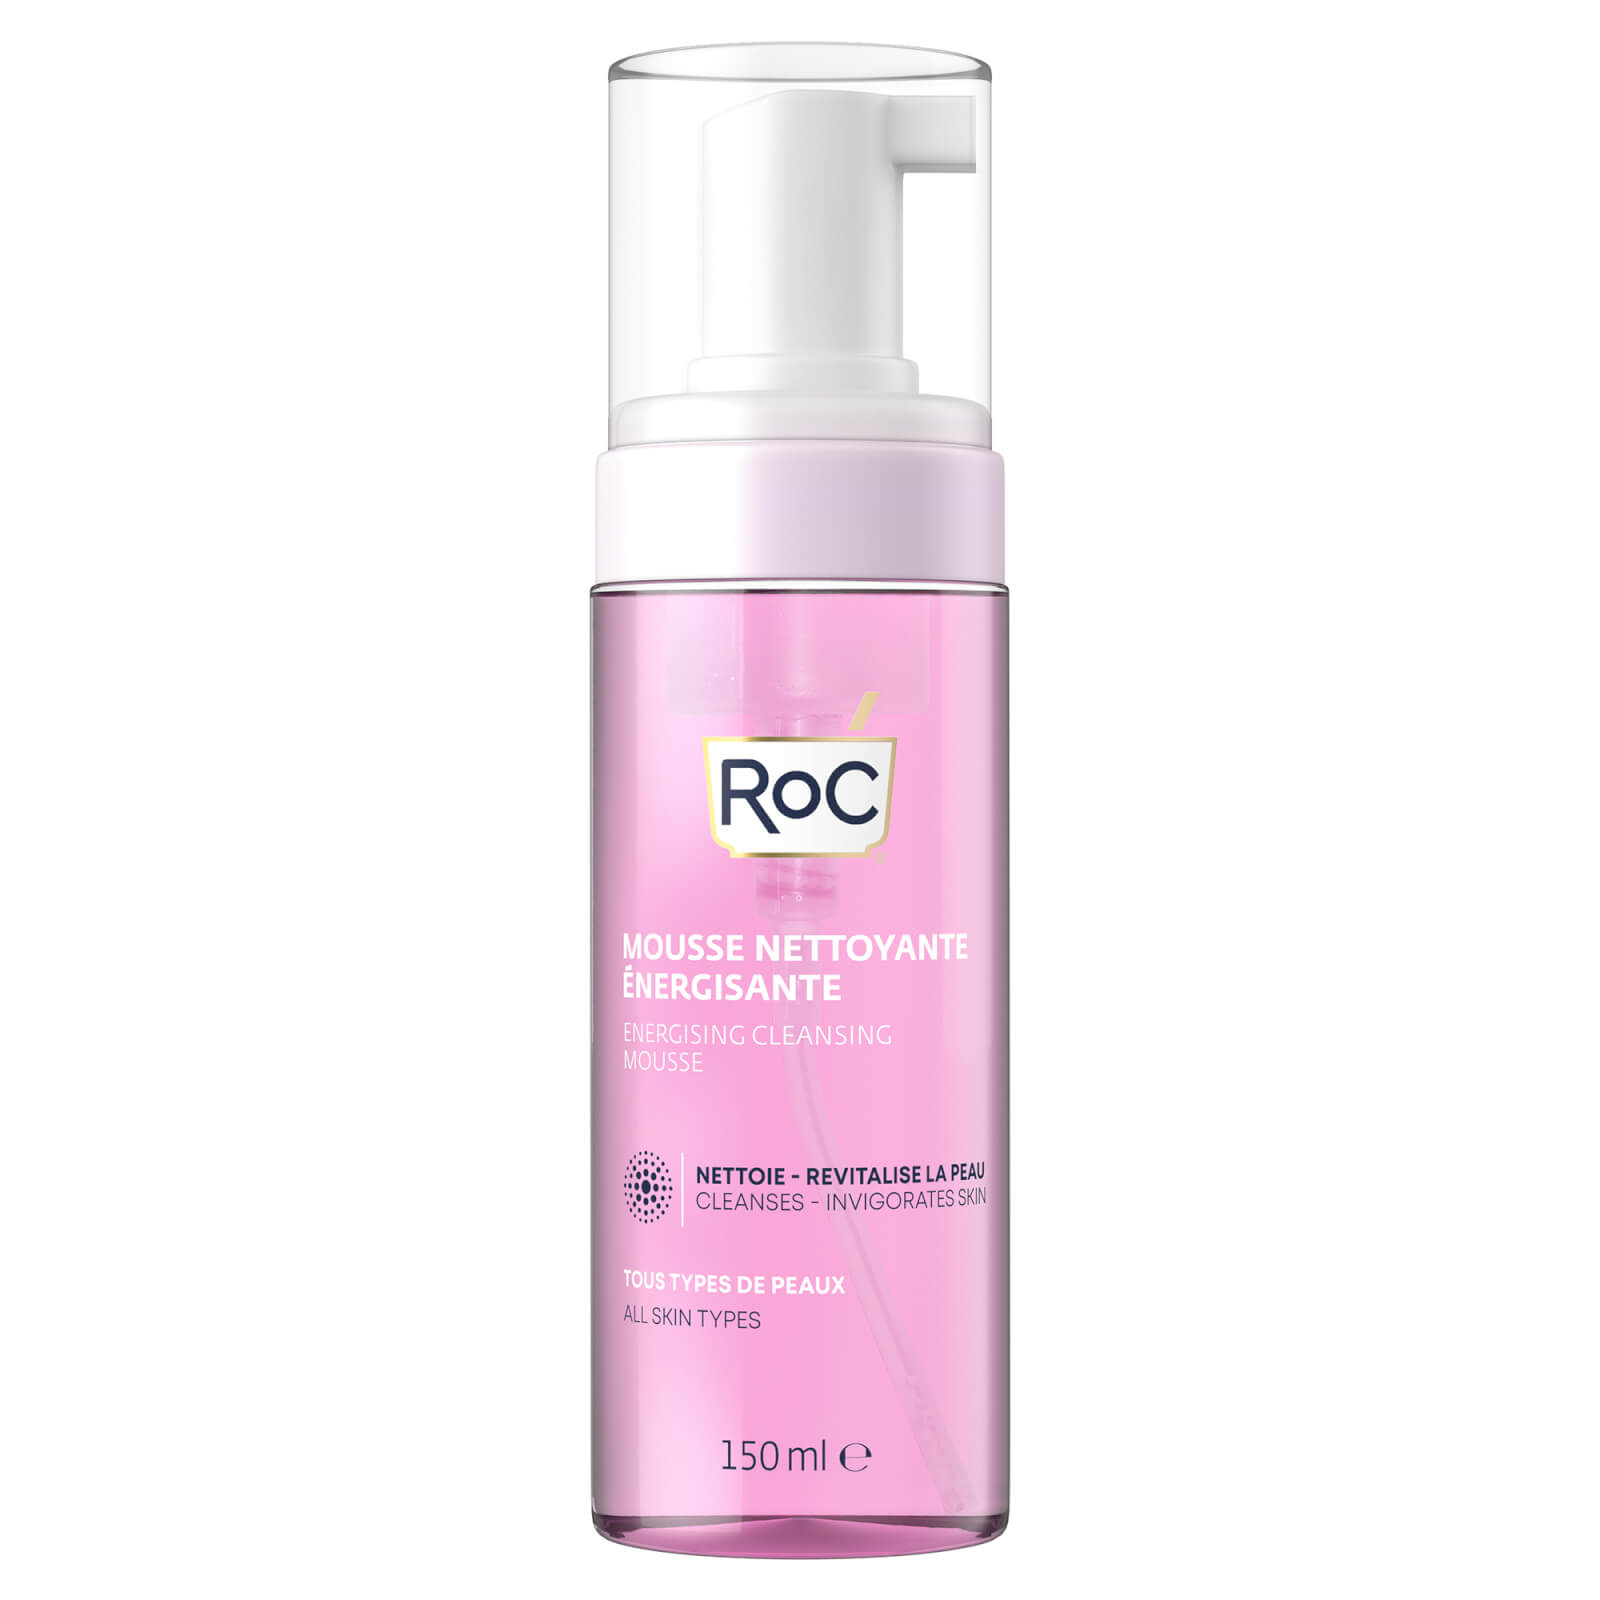 Photos - Facial / Body Cleansing Product RoC Energising Cleansing Mousse 150ml 2845100